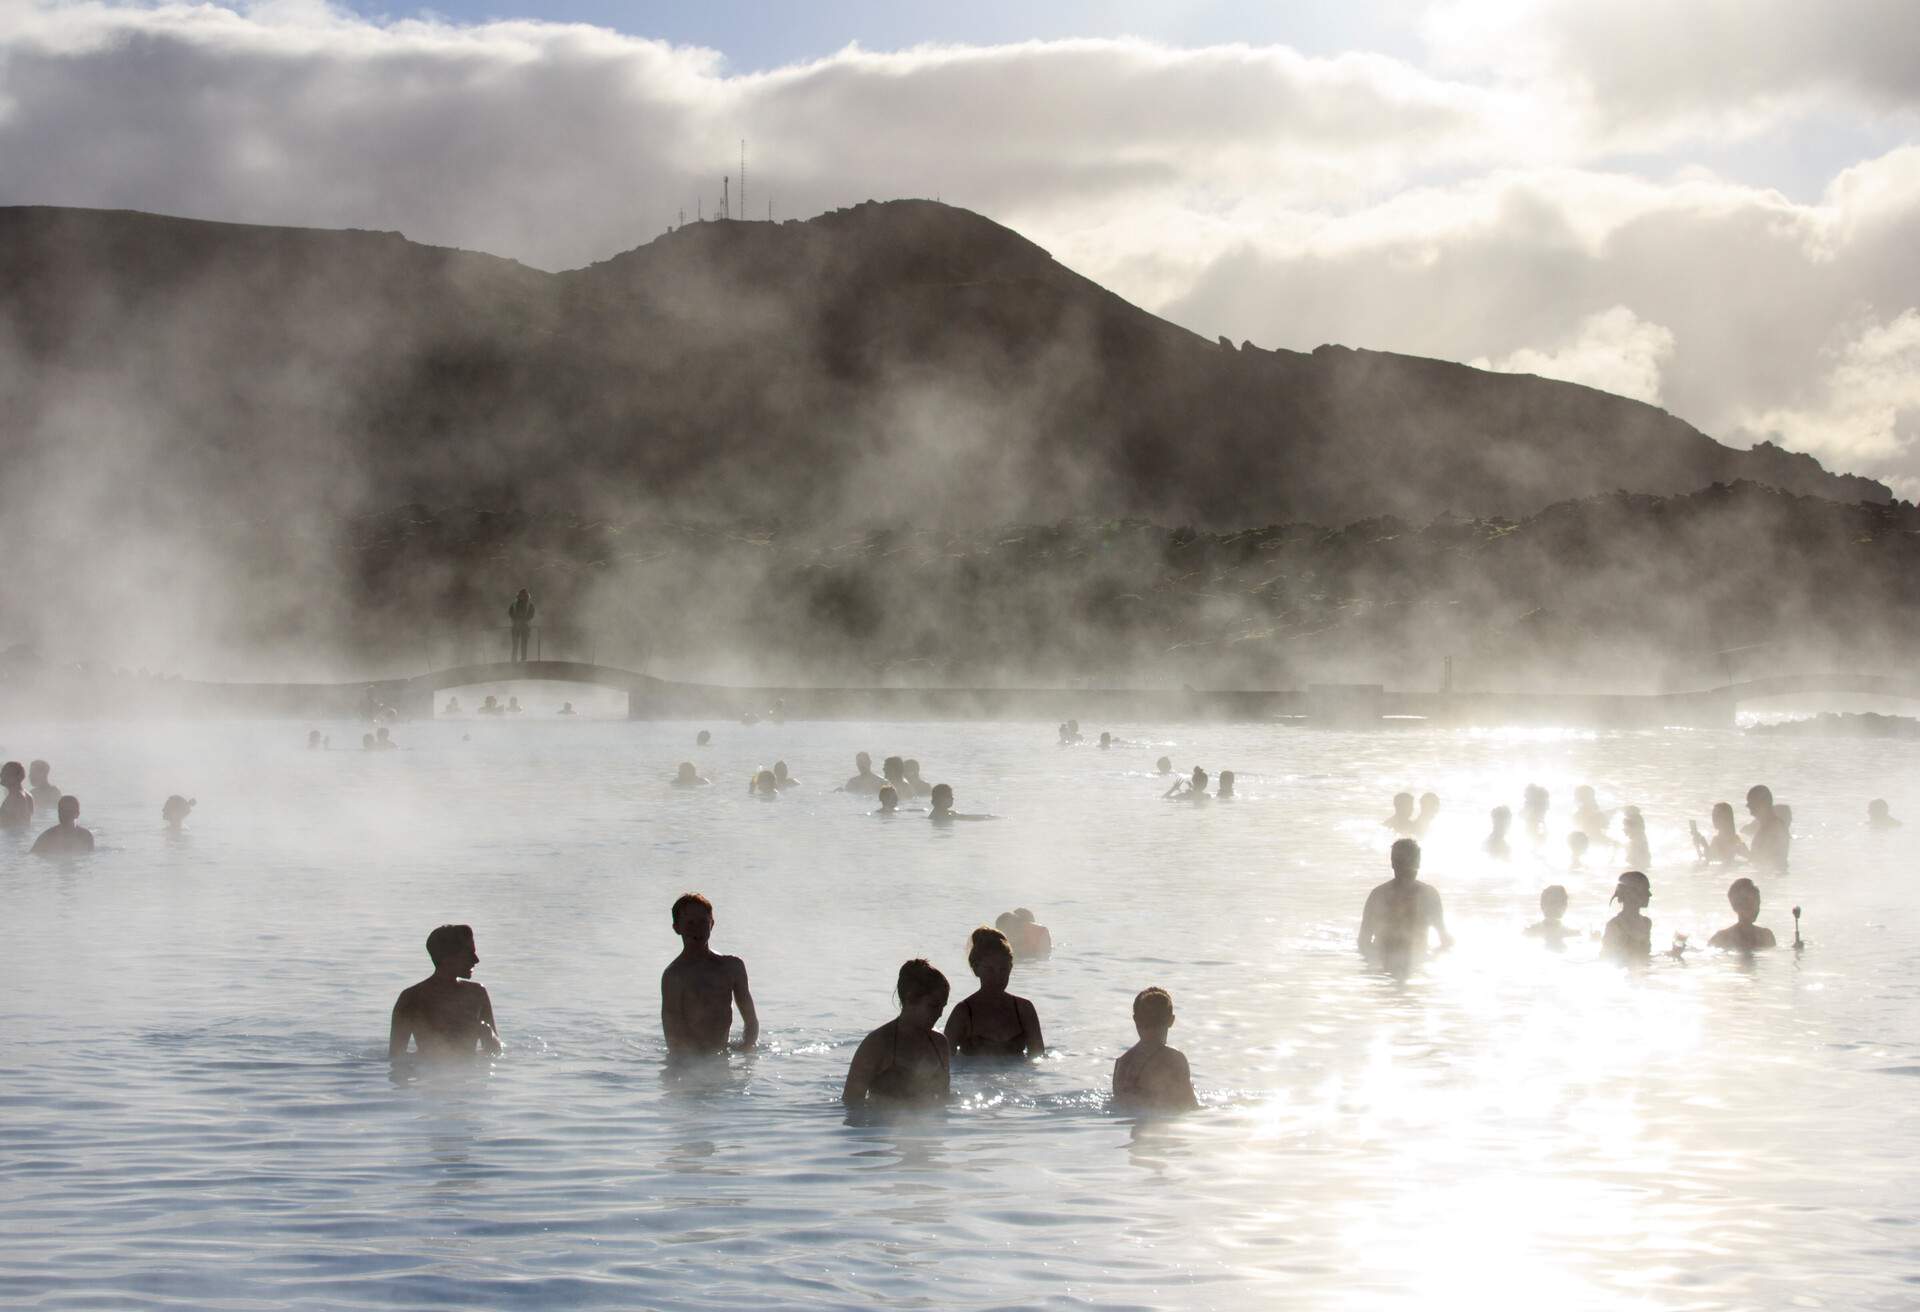 A sunny and relaxing day at the Blue Lagoon, Iceland